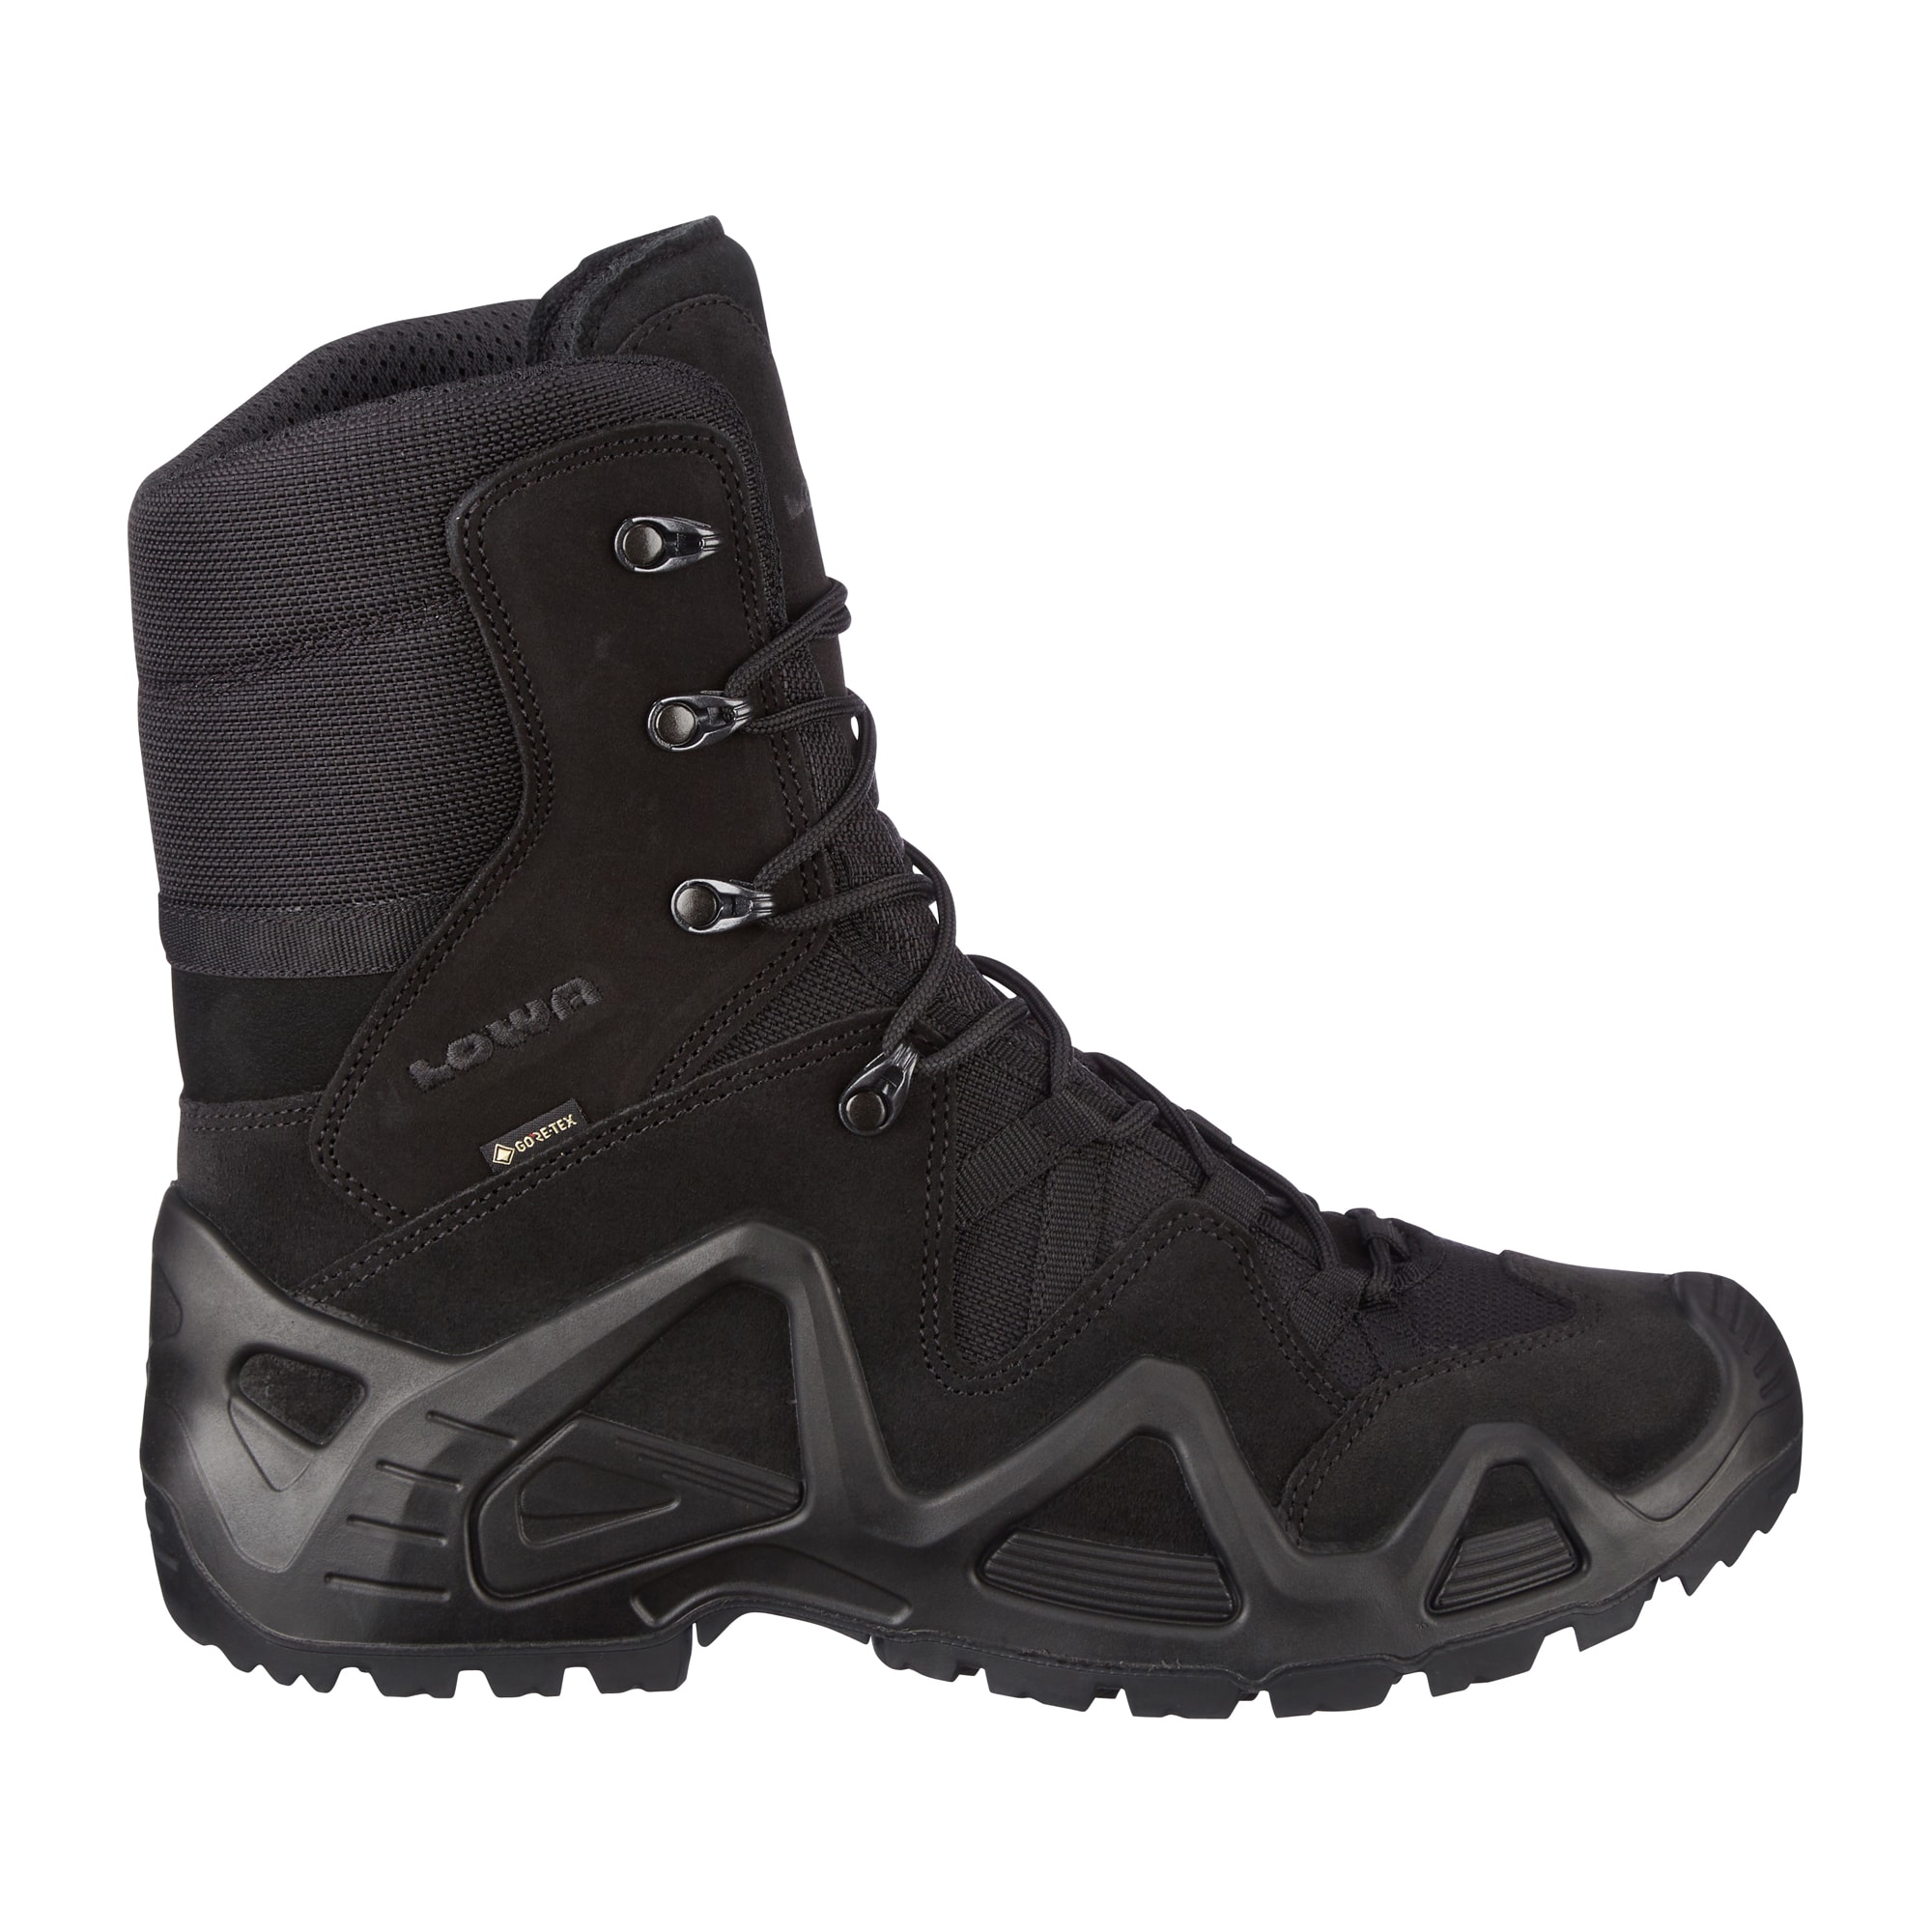 Purchase the Boots Lowa Zephyr GTX Hi black by ASMC